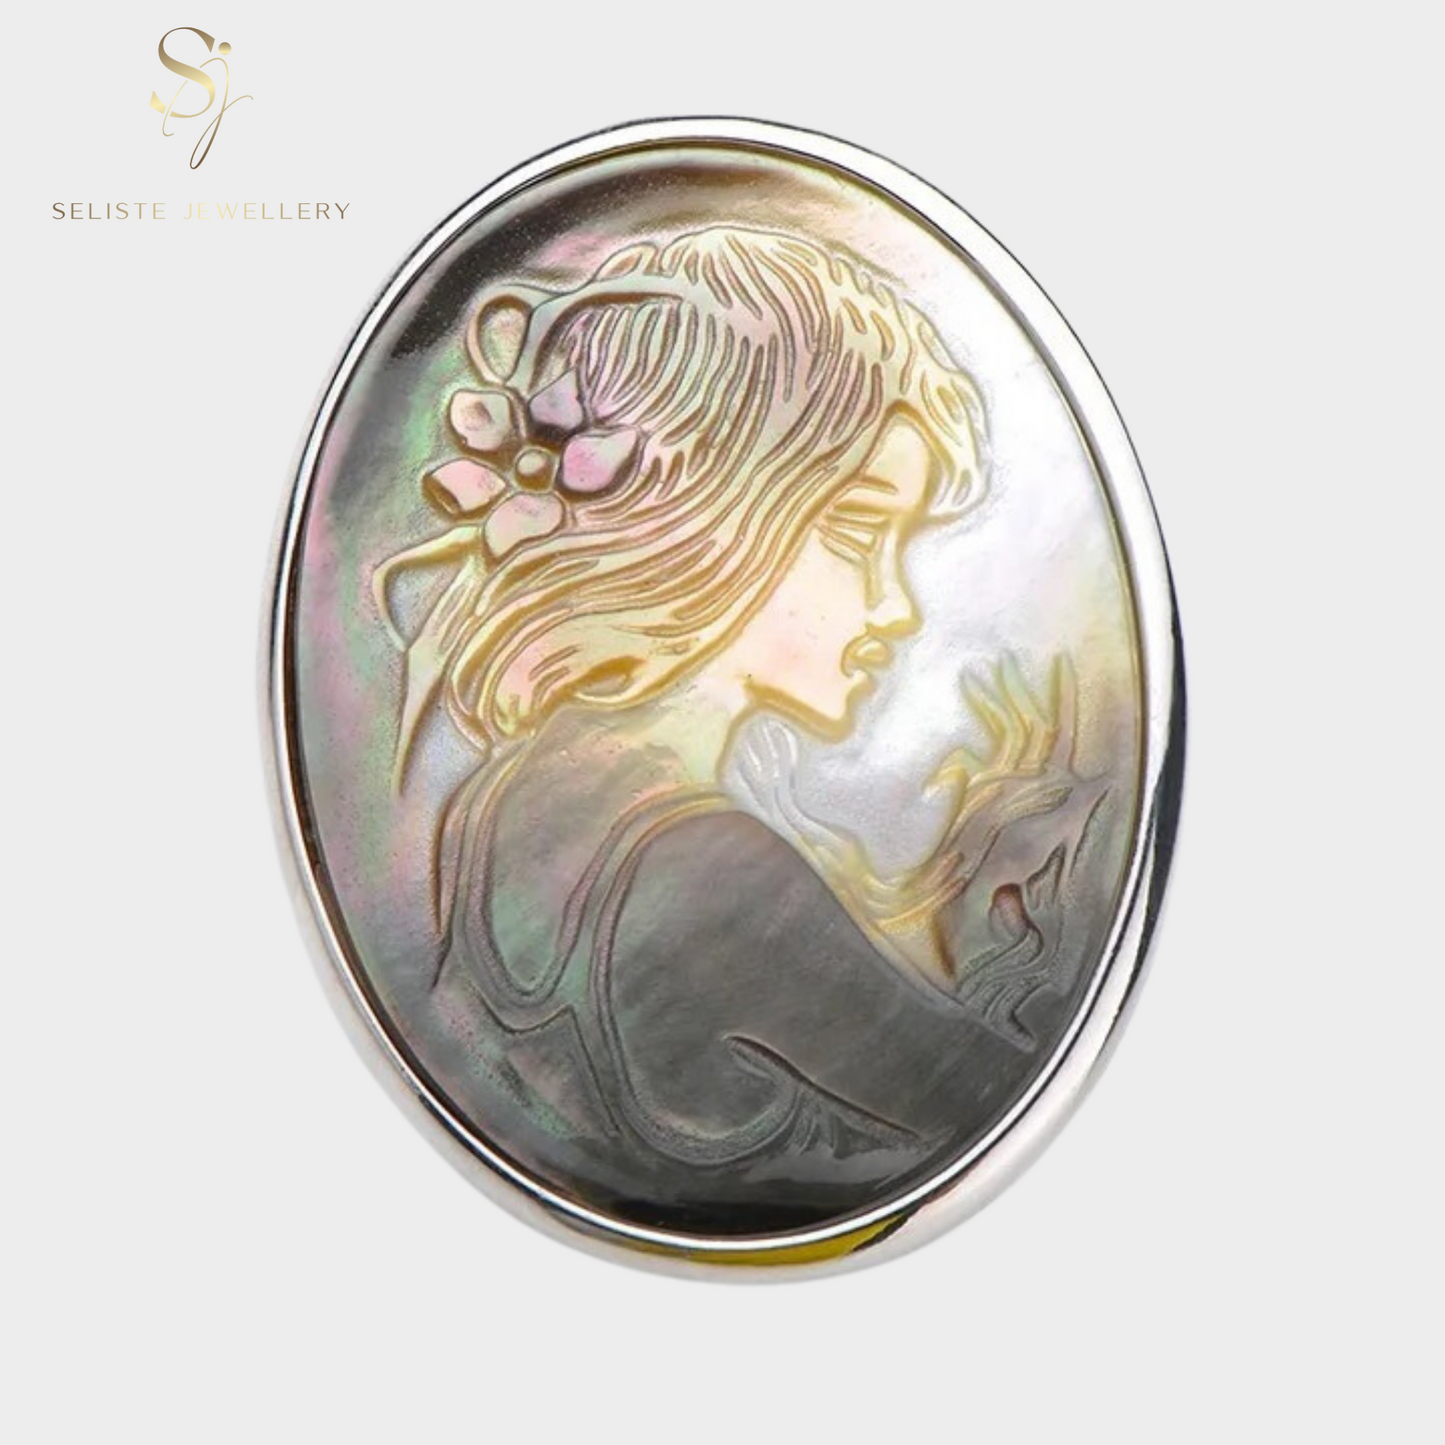 Delicate Victorian Style Mother Of Pearl Girl Portrait Silver Pin Brooch